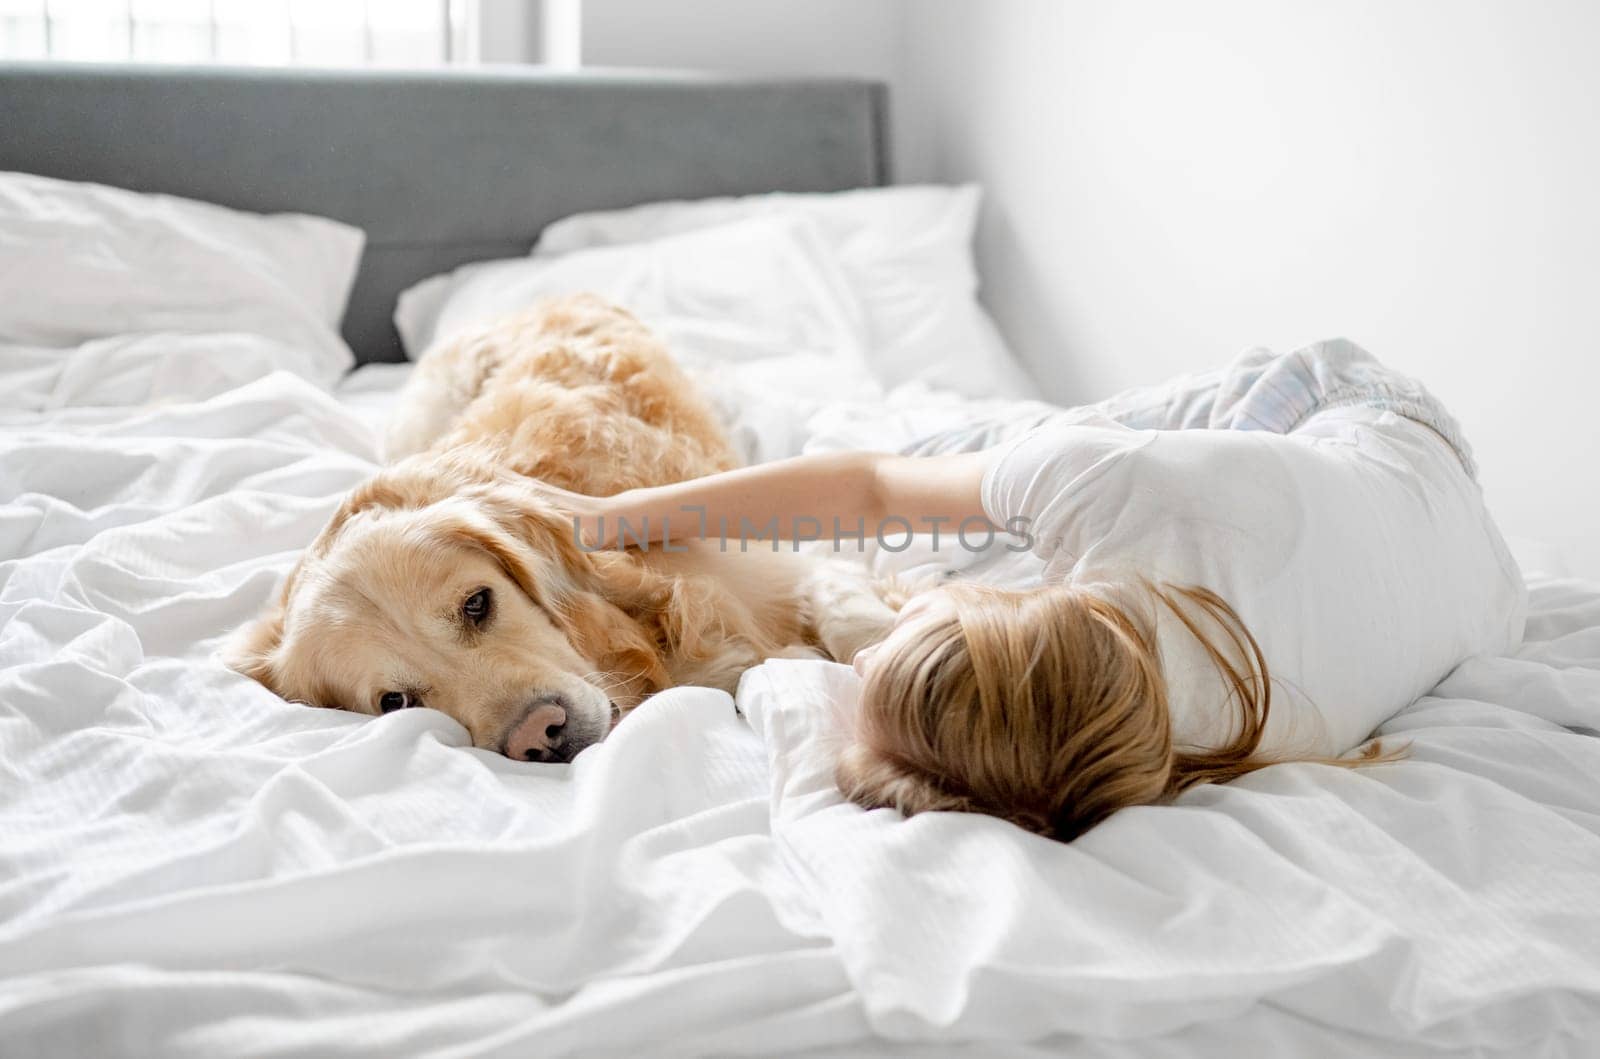 Girl Plays With Golden Retriever In Bed In The Morning In A Bright Room